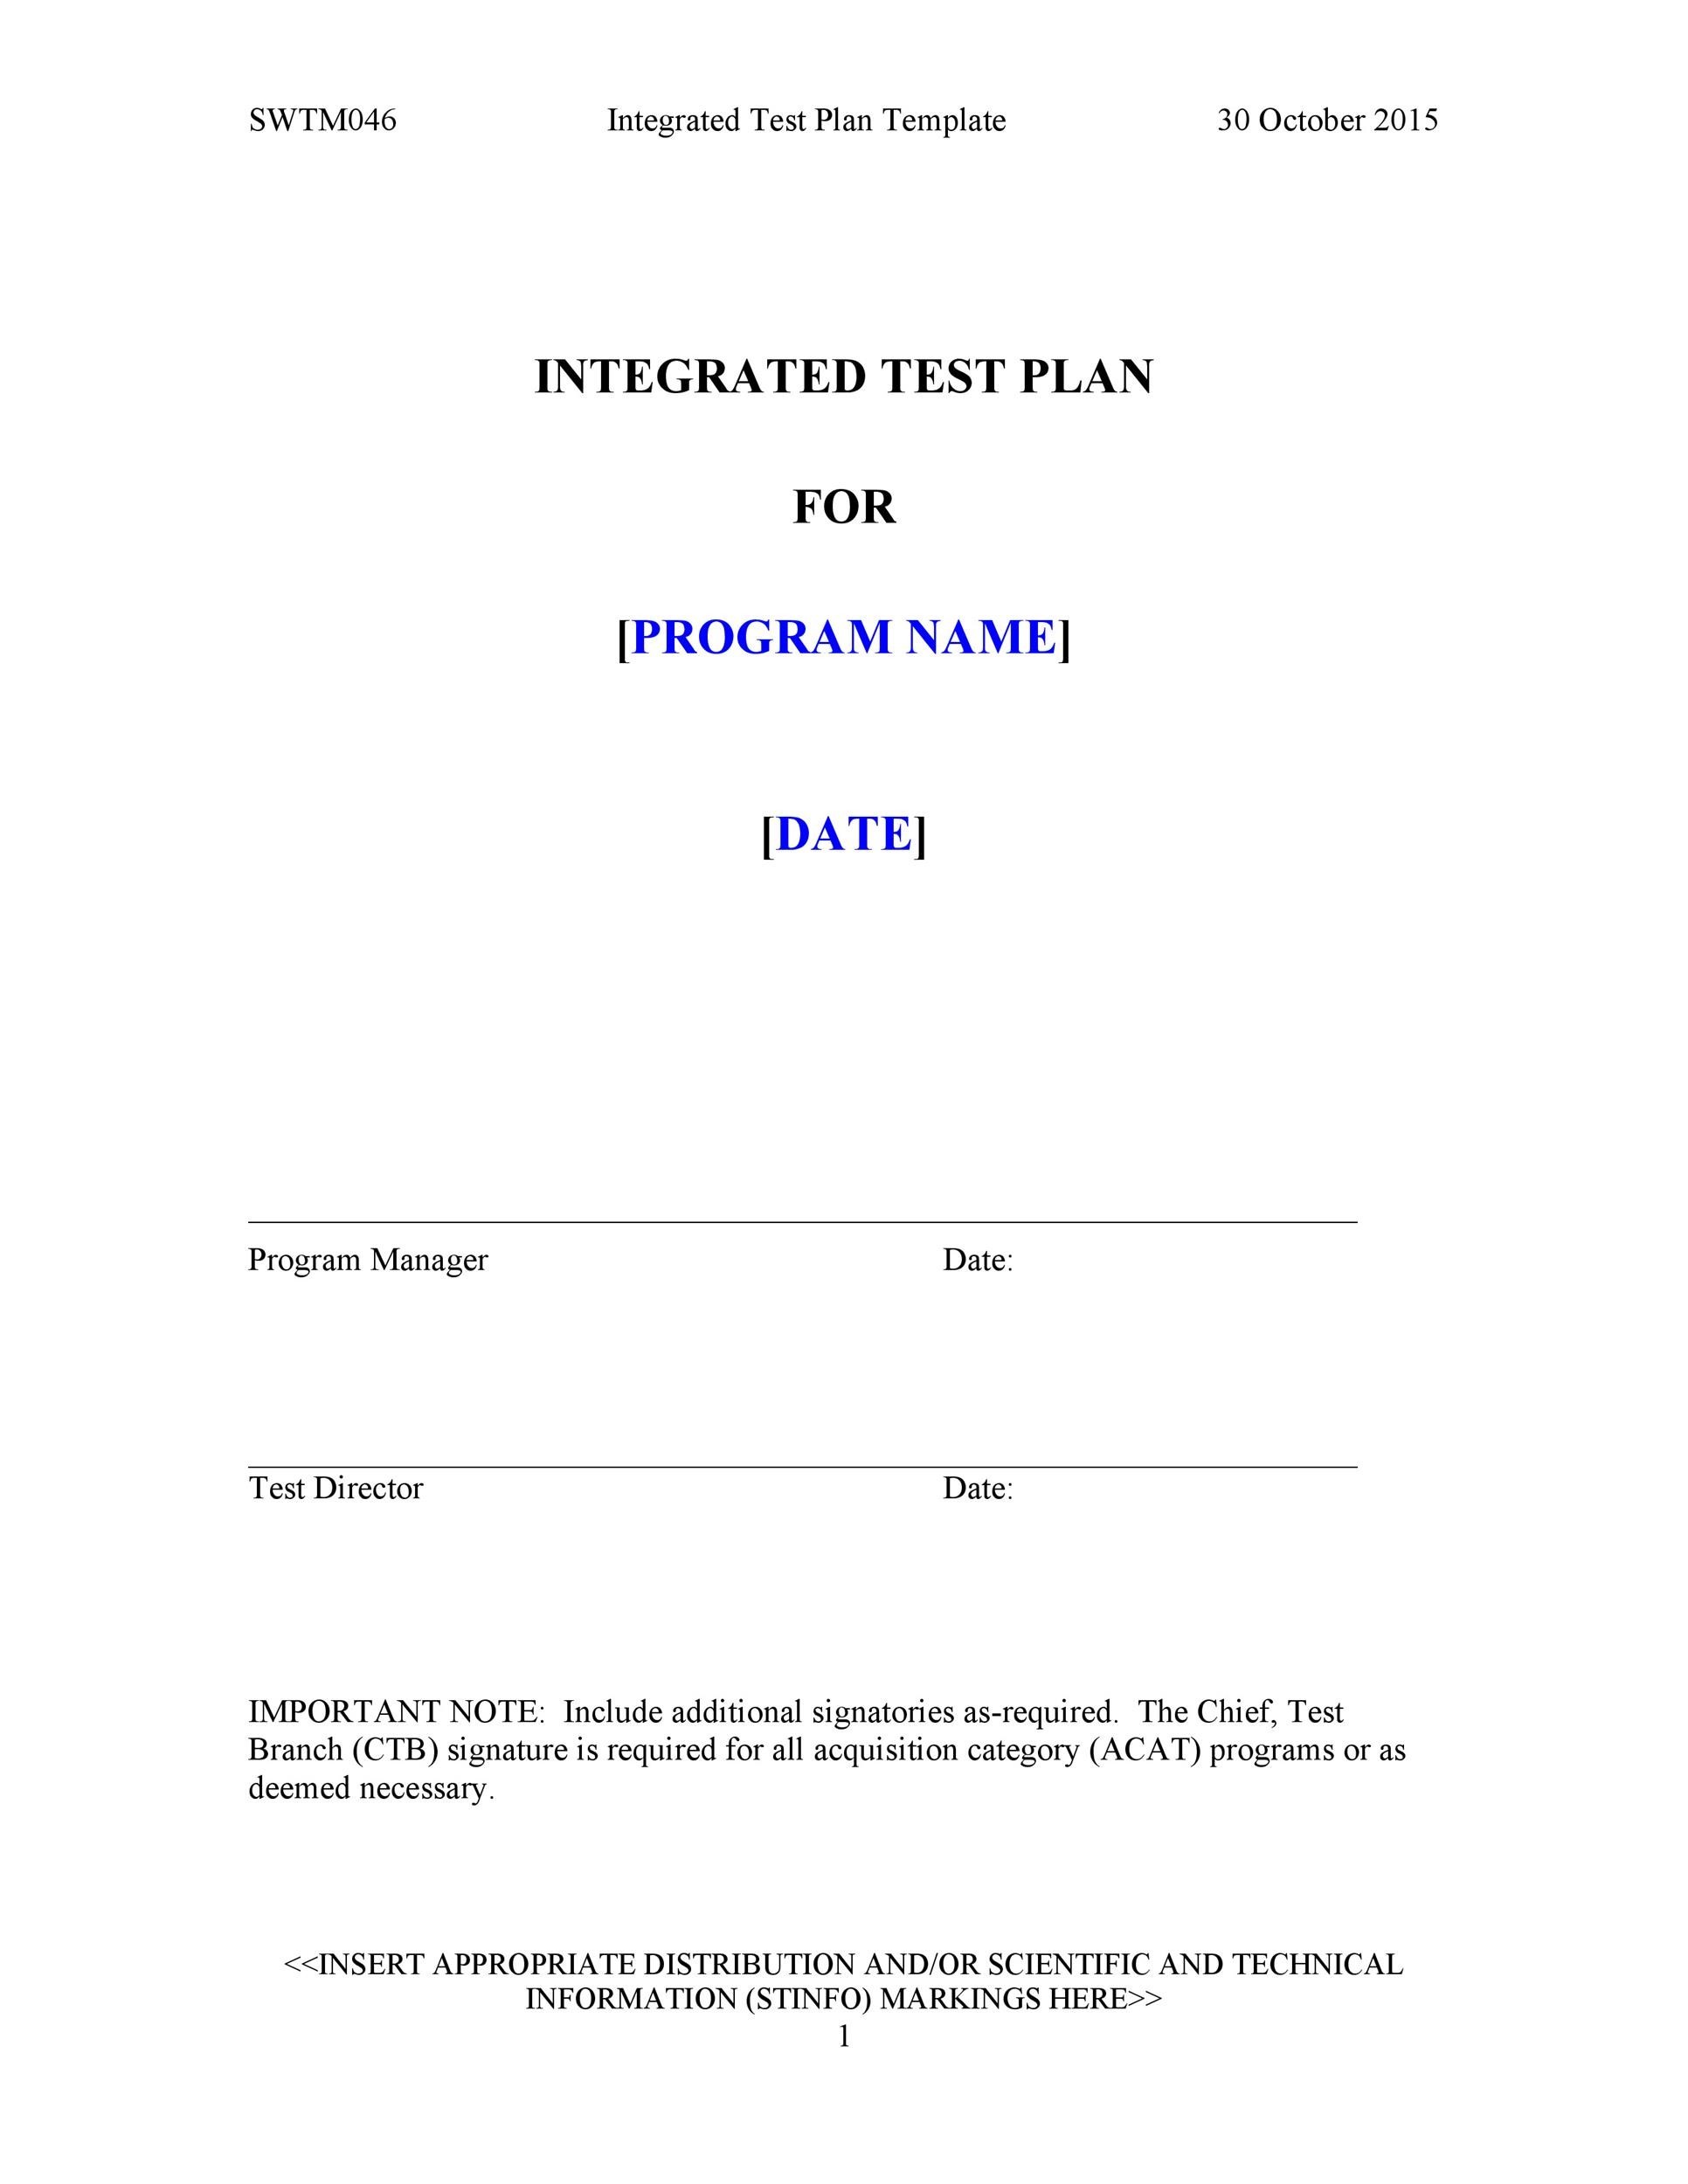 35 Software Test Plan Templates & Examples ᐅ TemplateLab